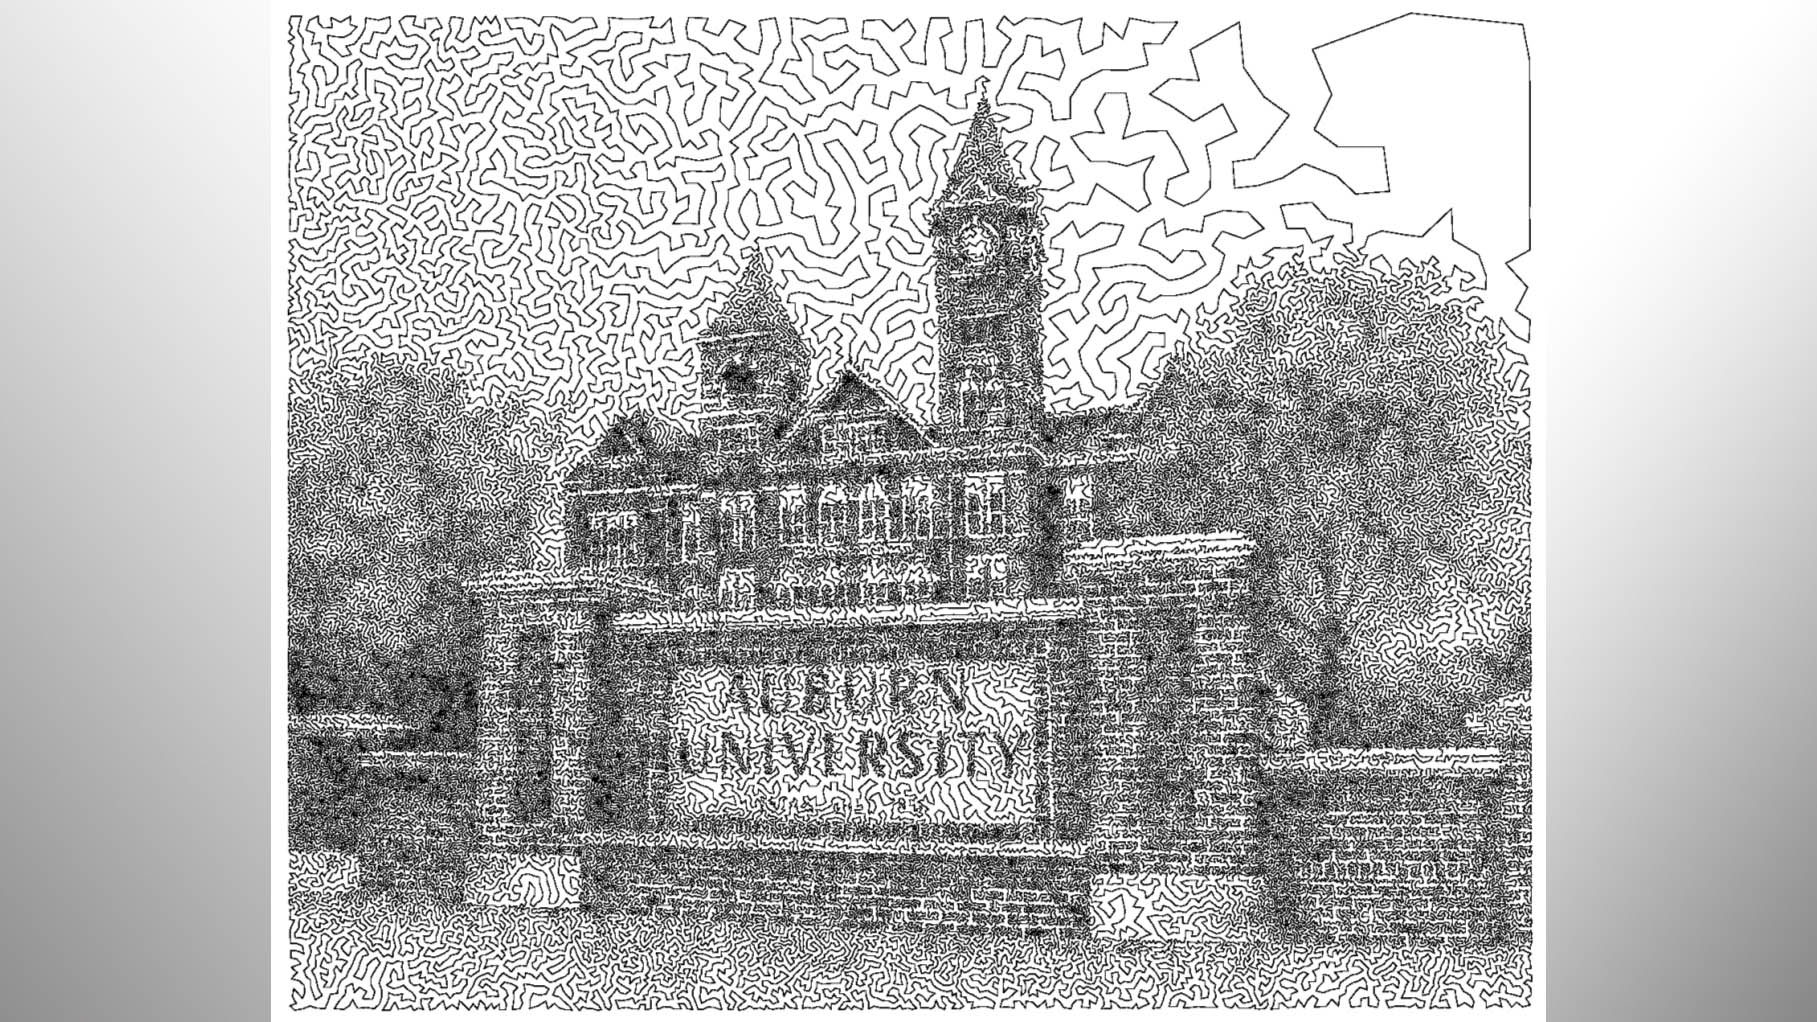 An intricate half-tone image of Auburn’s iconic Samford Hall rendered in a single continuous line produced by Daniel Silva and Alexander Vinel, assistant professors in industrial and systems engineering. The computational tools used to create the image are both widely used operation research algorithms with applications in numerous fields of engineering and science.